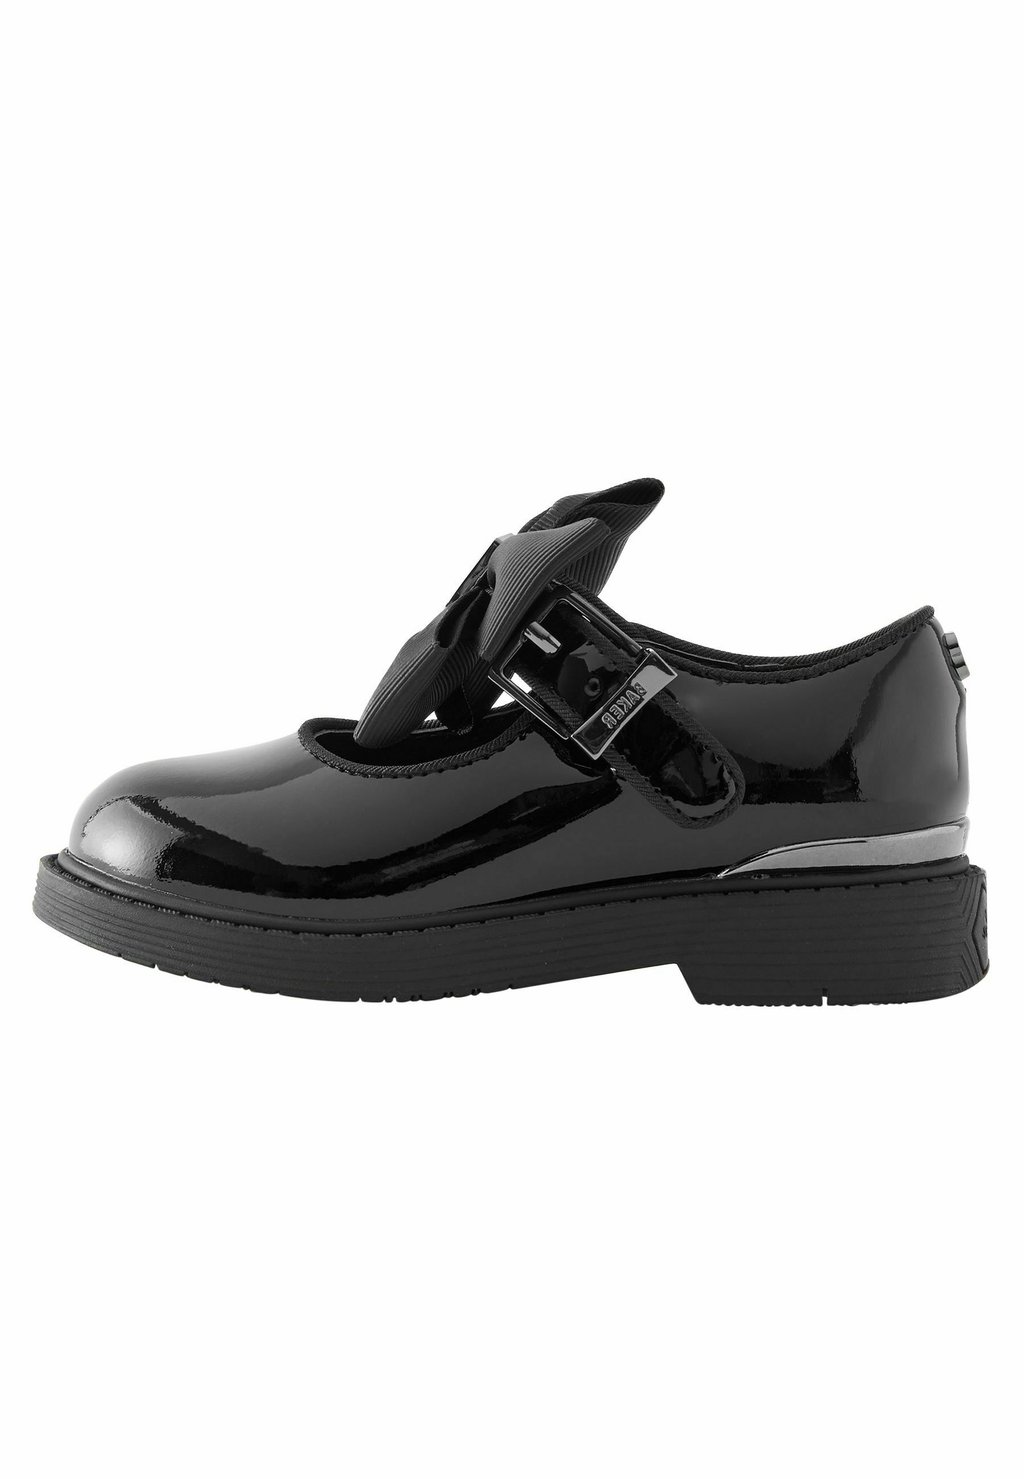 кроссовки ted baker libbin black Балетки BAKER BY TED BAKER GIRLS BACK TO SCHOOL MARY JANE BLACK SHOES WITH BOW, цвет black